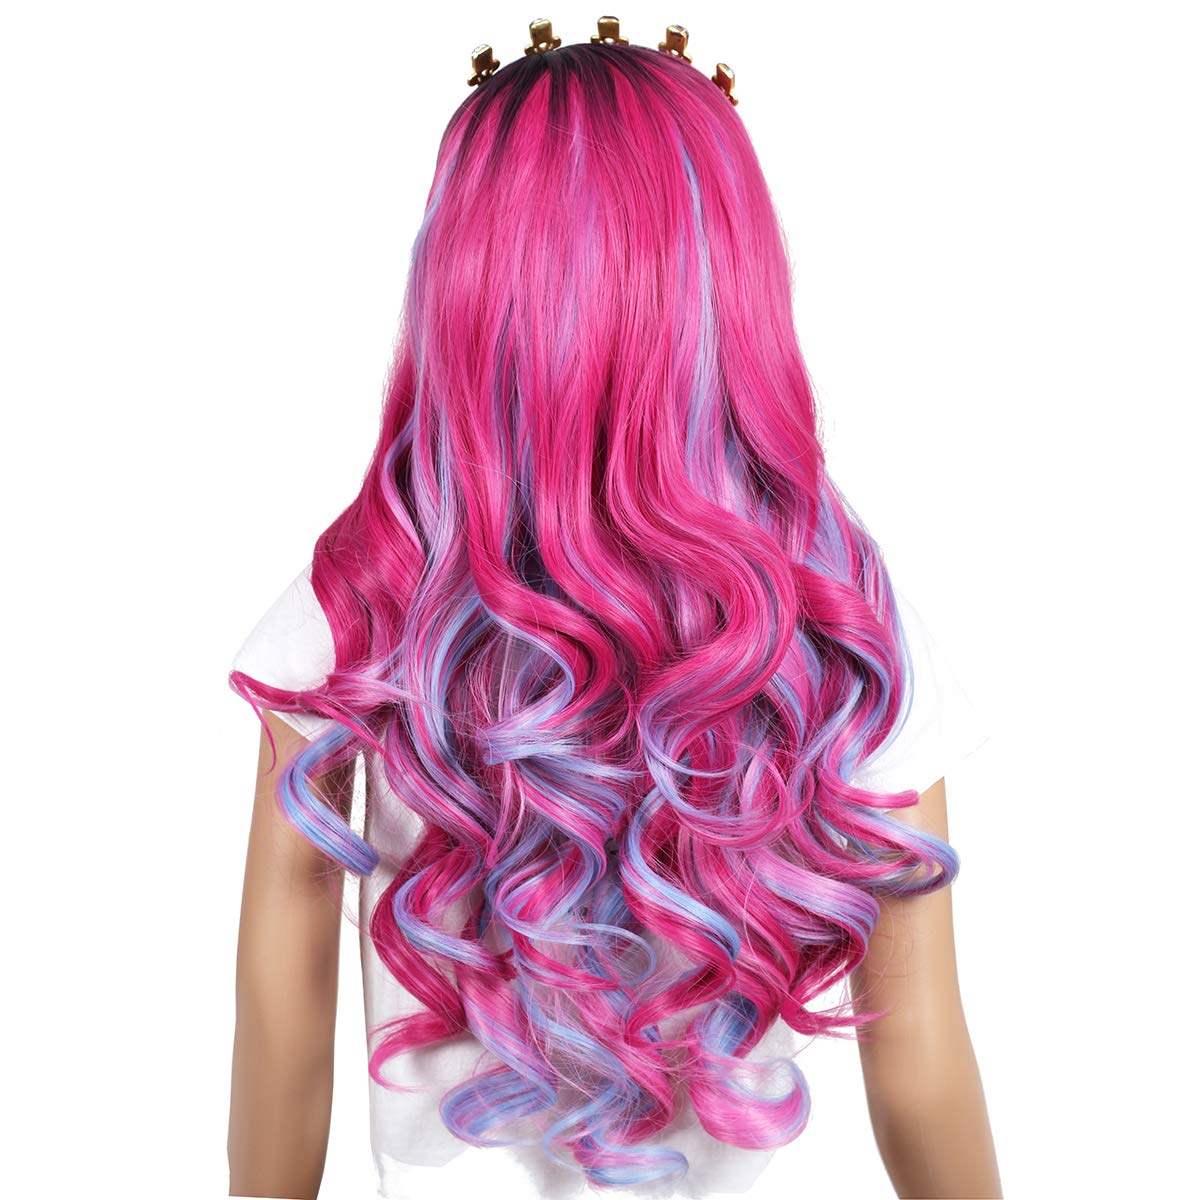 ColorGround Kids Long Wavy Pink and Light Blue Mixed Cosplay Wig with Crown